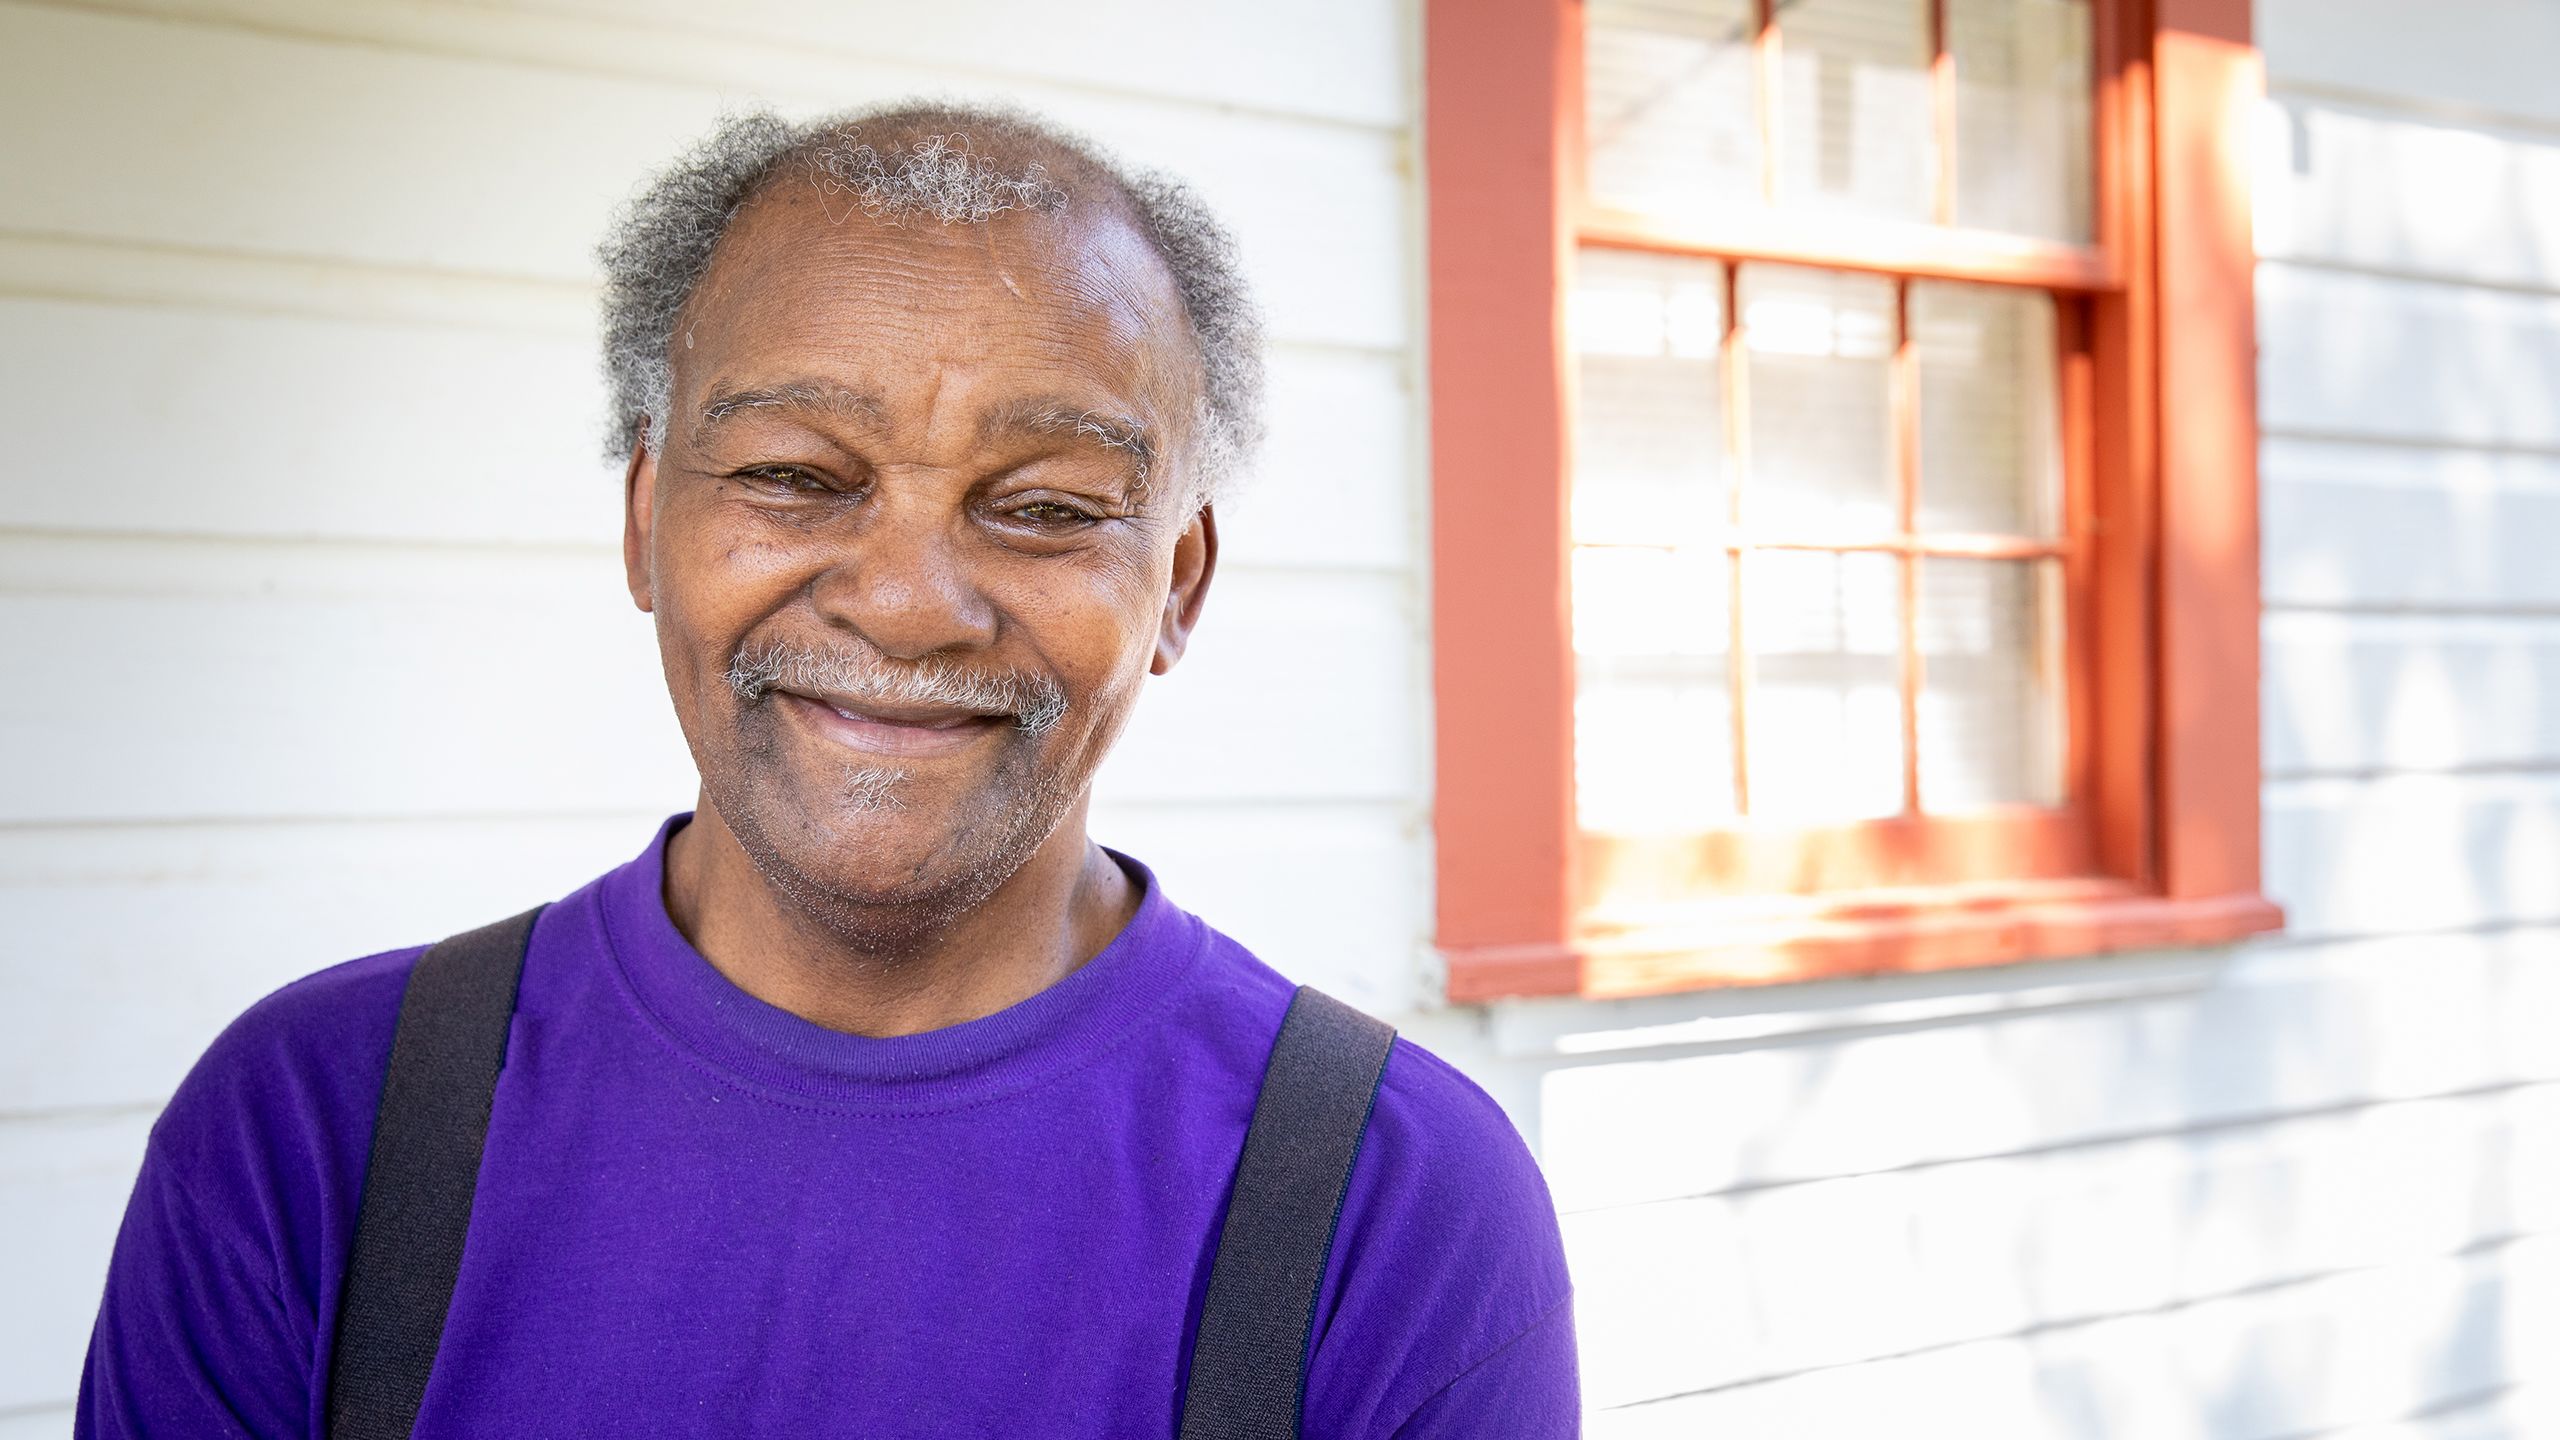 Walter (an older, balding black man wearing a purple shirt and suspenders) stands outside his home.